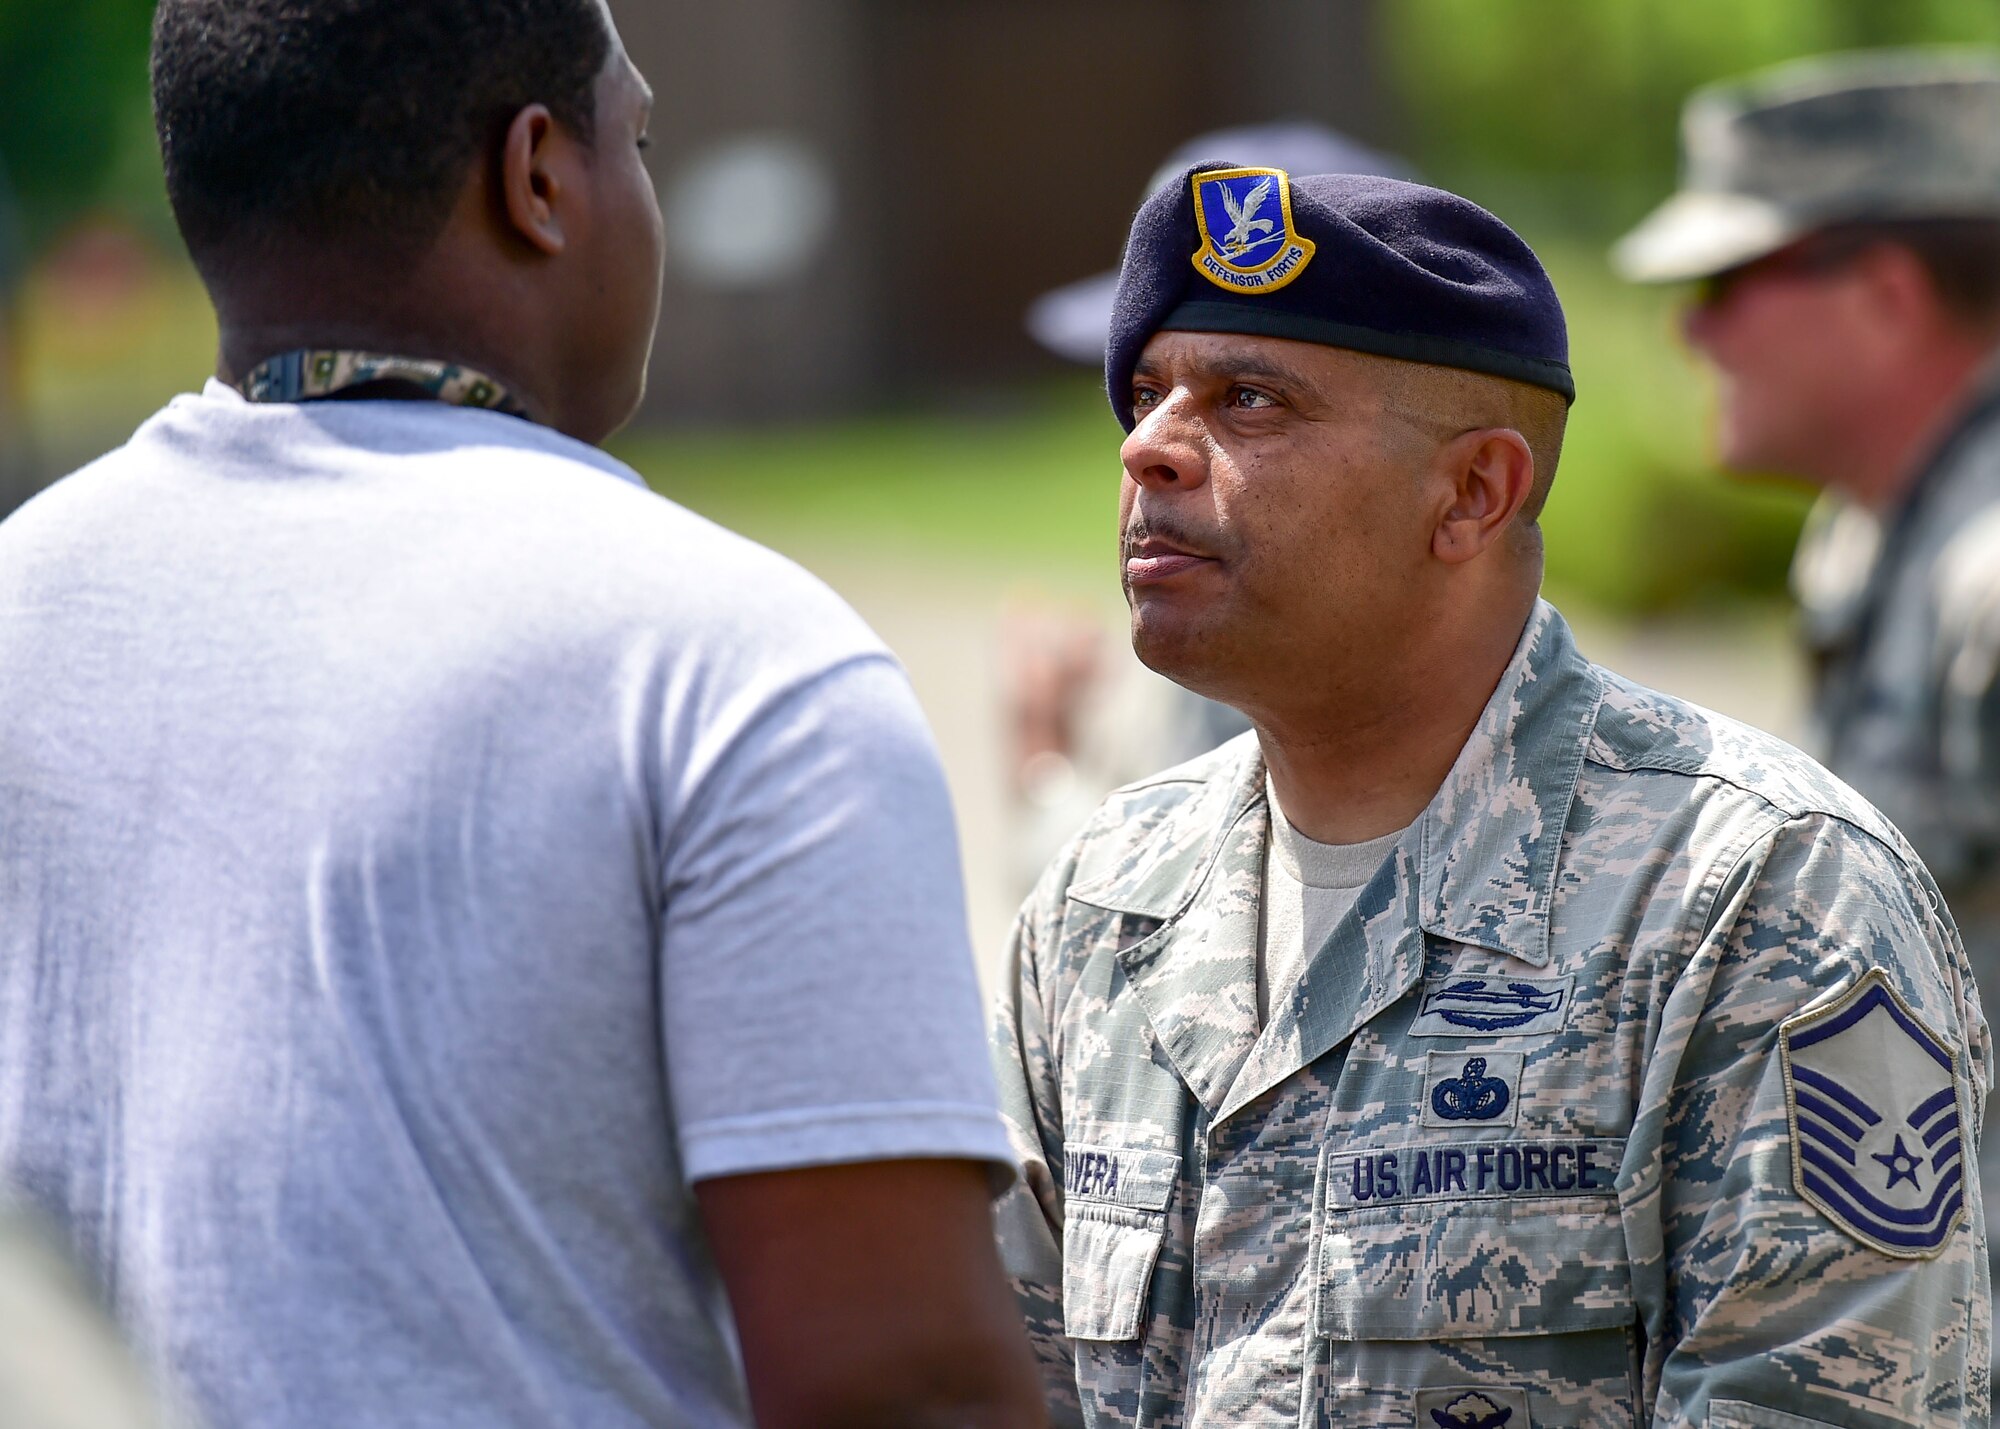 U.S. Air Force Citizen Airman Master Sgt. Jose Rivera, a member of the 910th Security Forces Squadron, addresses a Junior Reserve Officer Training Corps (JROTC) cadet during an encampment here, June 21, 2017. The encampment, facilitated by 910th Airlift Wing Airmen, provided a five-day experience teaching military skills and replicating aspects of Basic Military Training. JROTC is a program sponsored by the Armed Forces for high school students across the country. (U.S. Air Force photo/Eric White)